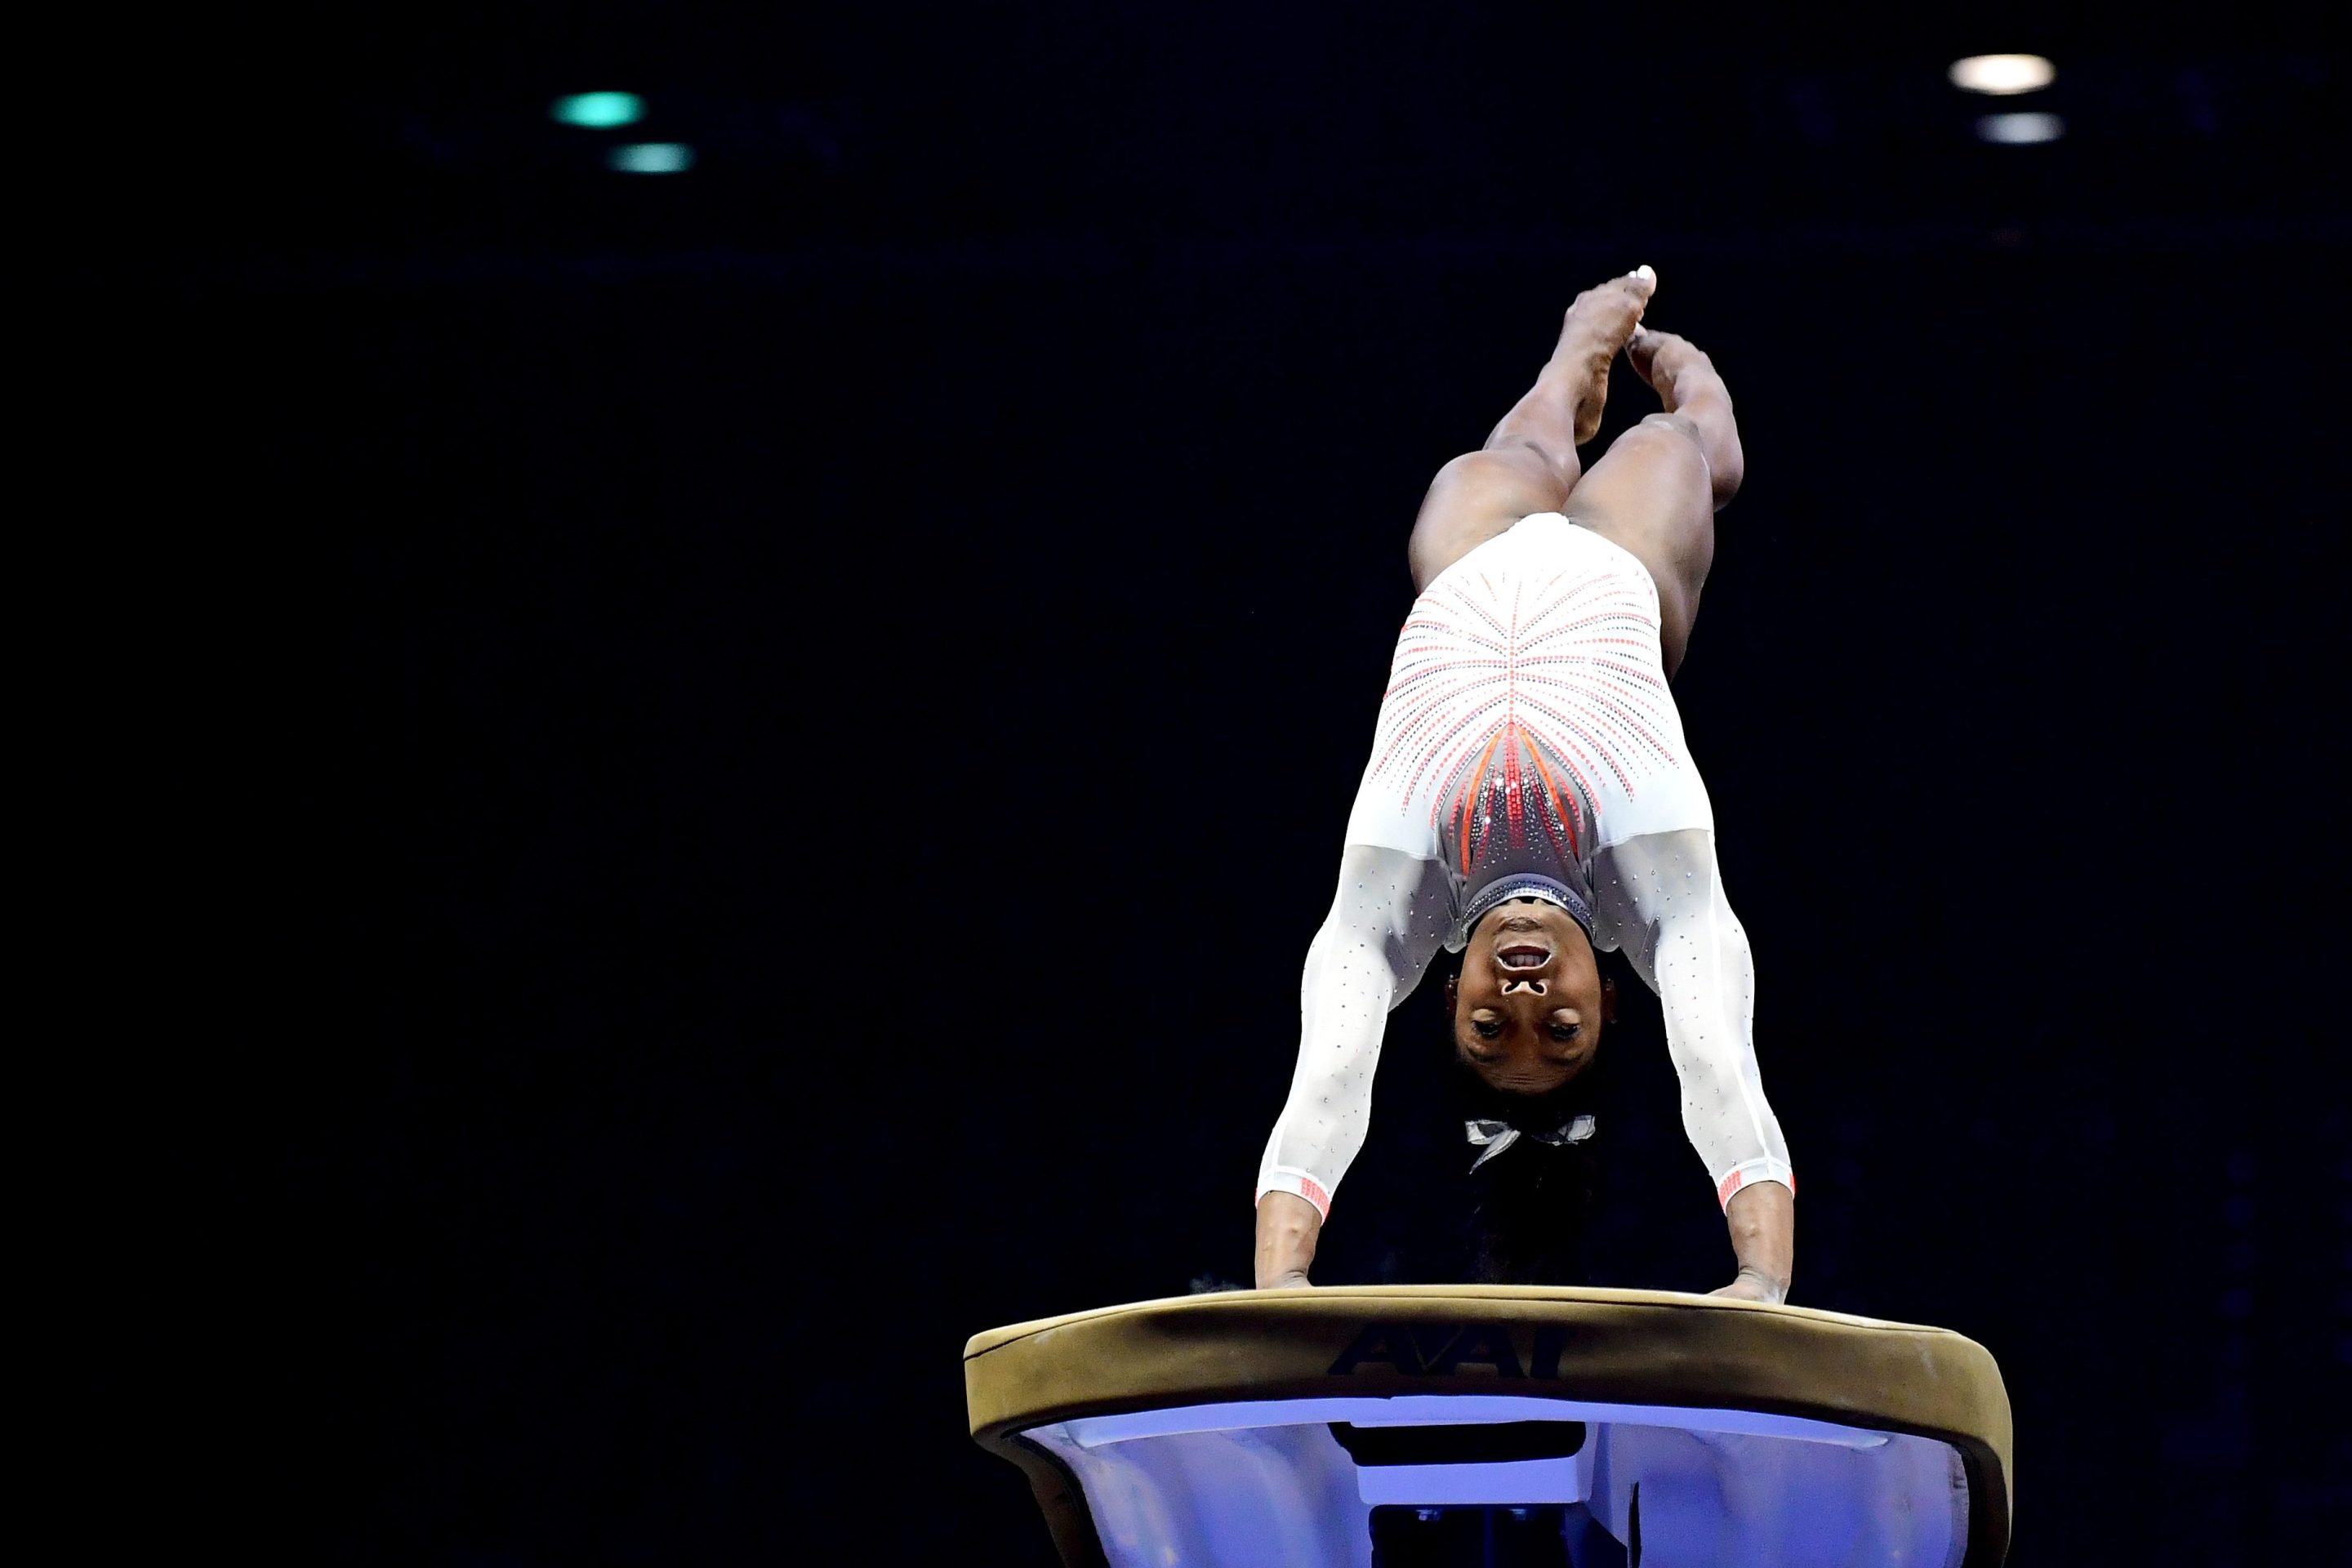 Simone Biles does the Yurchenko double pike while competing on the vault during the 2021 GK U.S. Classic gymnastics competition at the Indiana Convention Center on May 22, 2021 in Indianapolis, Indiana. Biles became the first woman in history to land the Yurchenko double pike in competition.